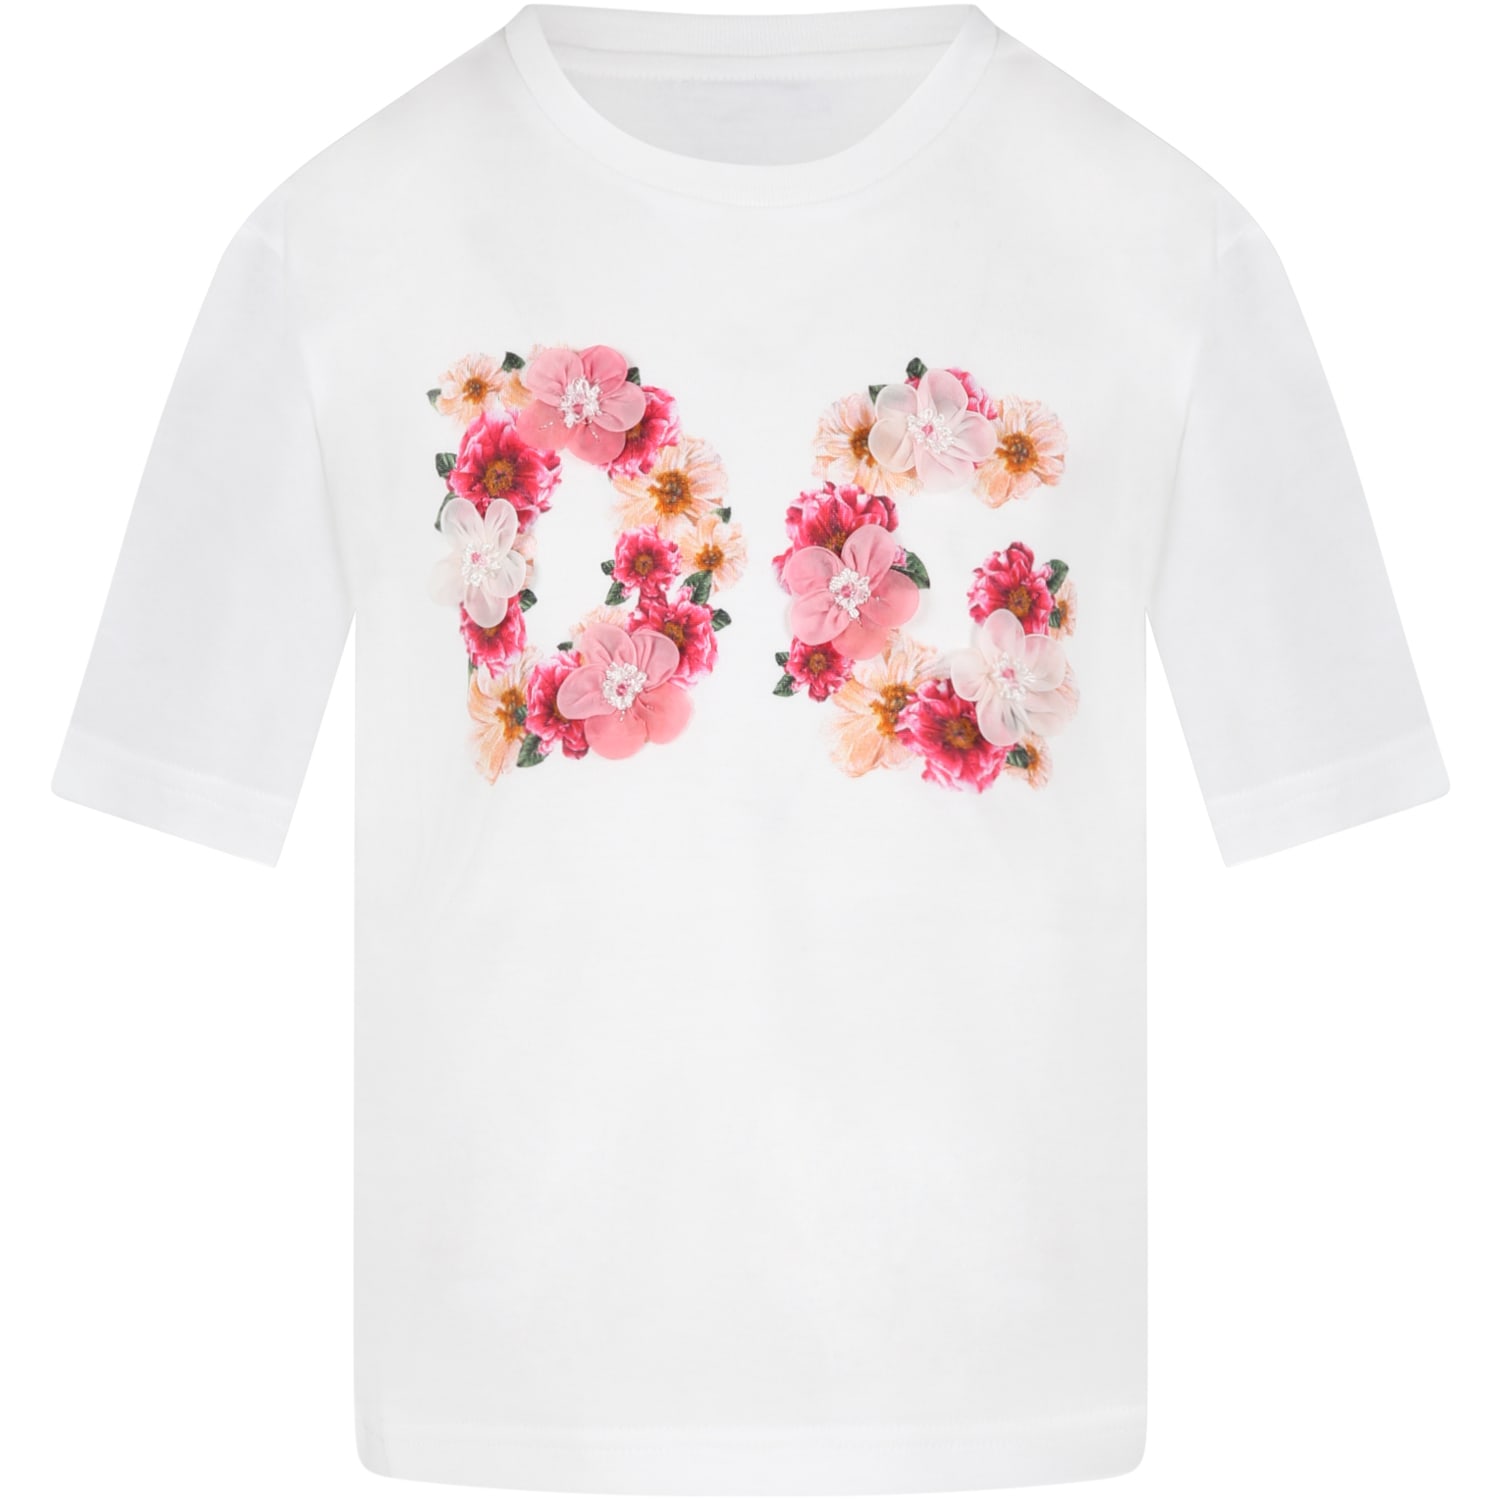 Dolce & Gabbana White T-shirt For Girl With Flowers